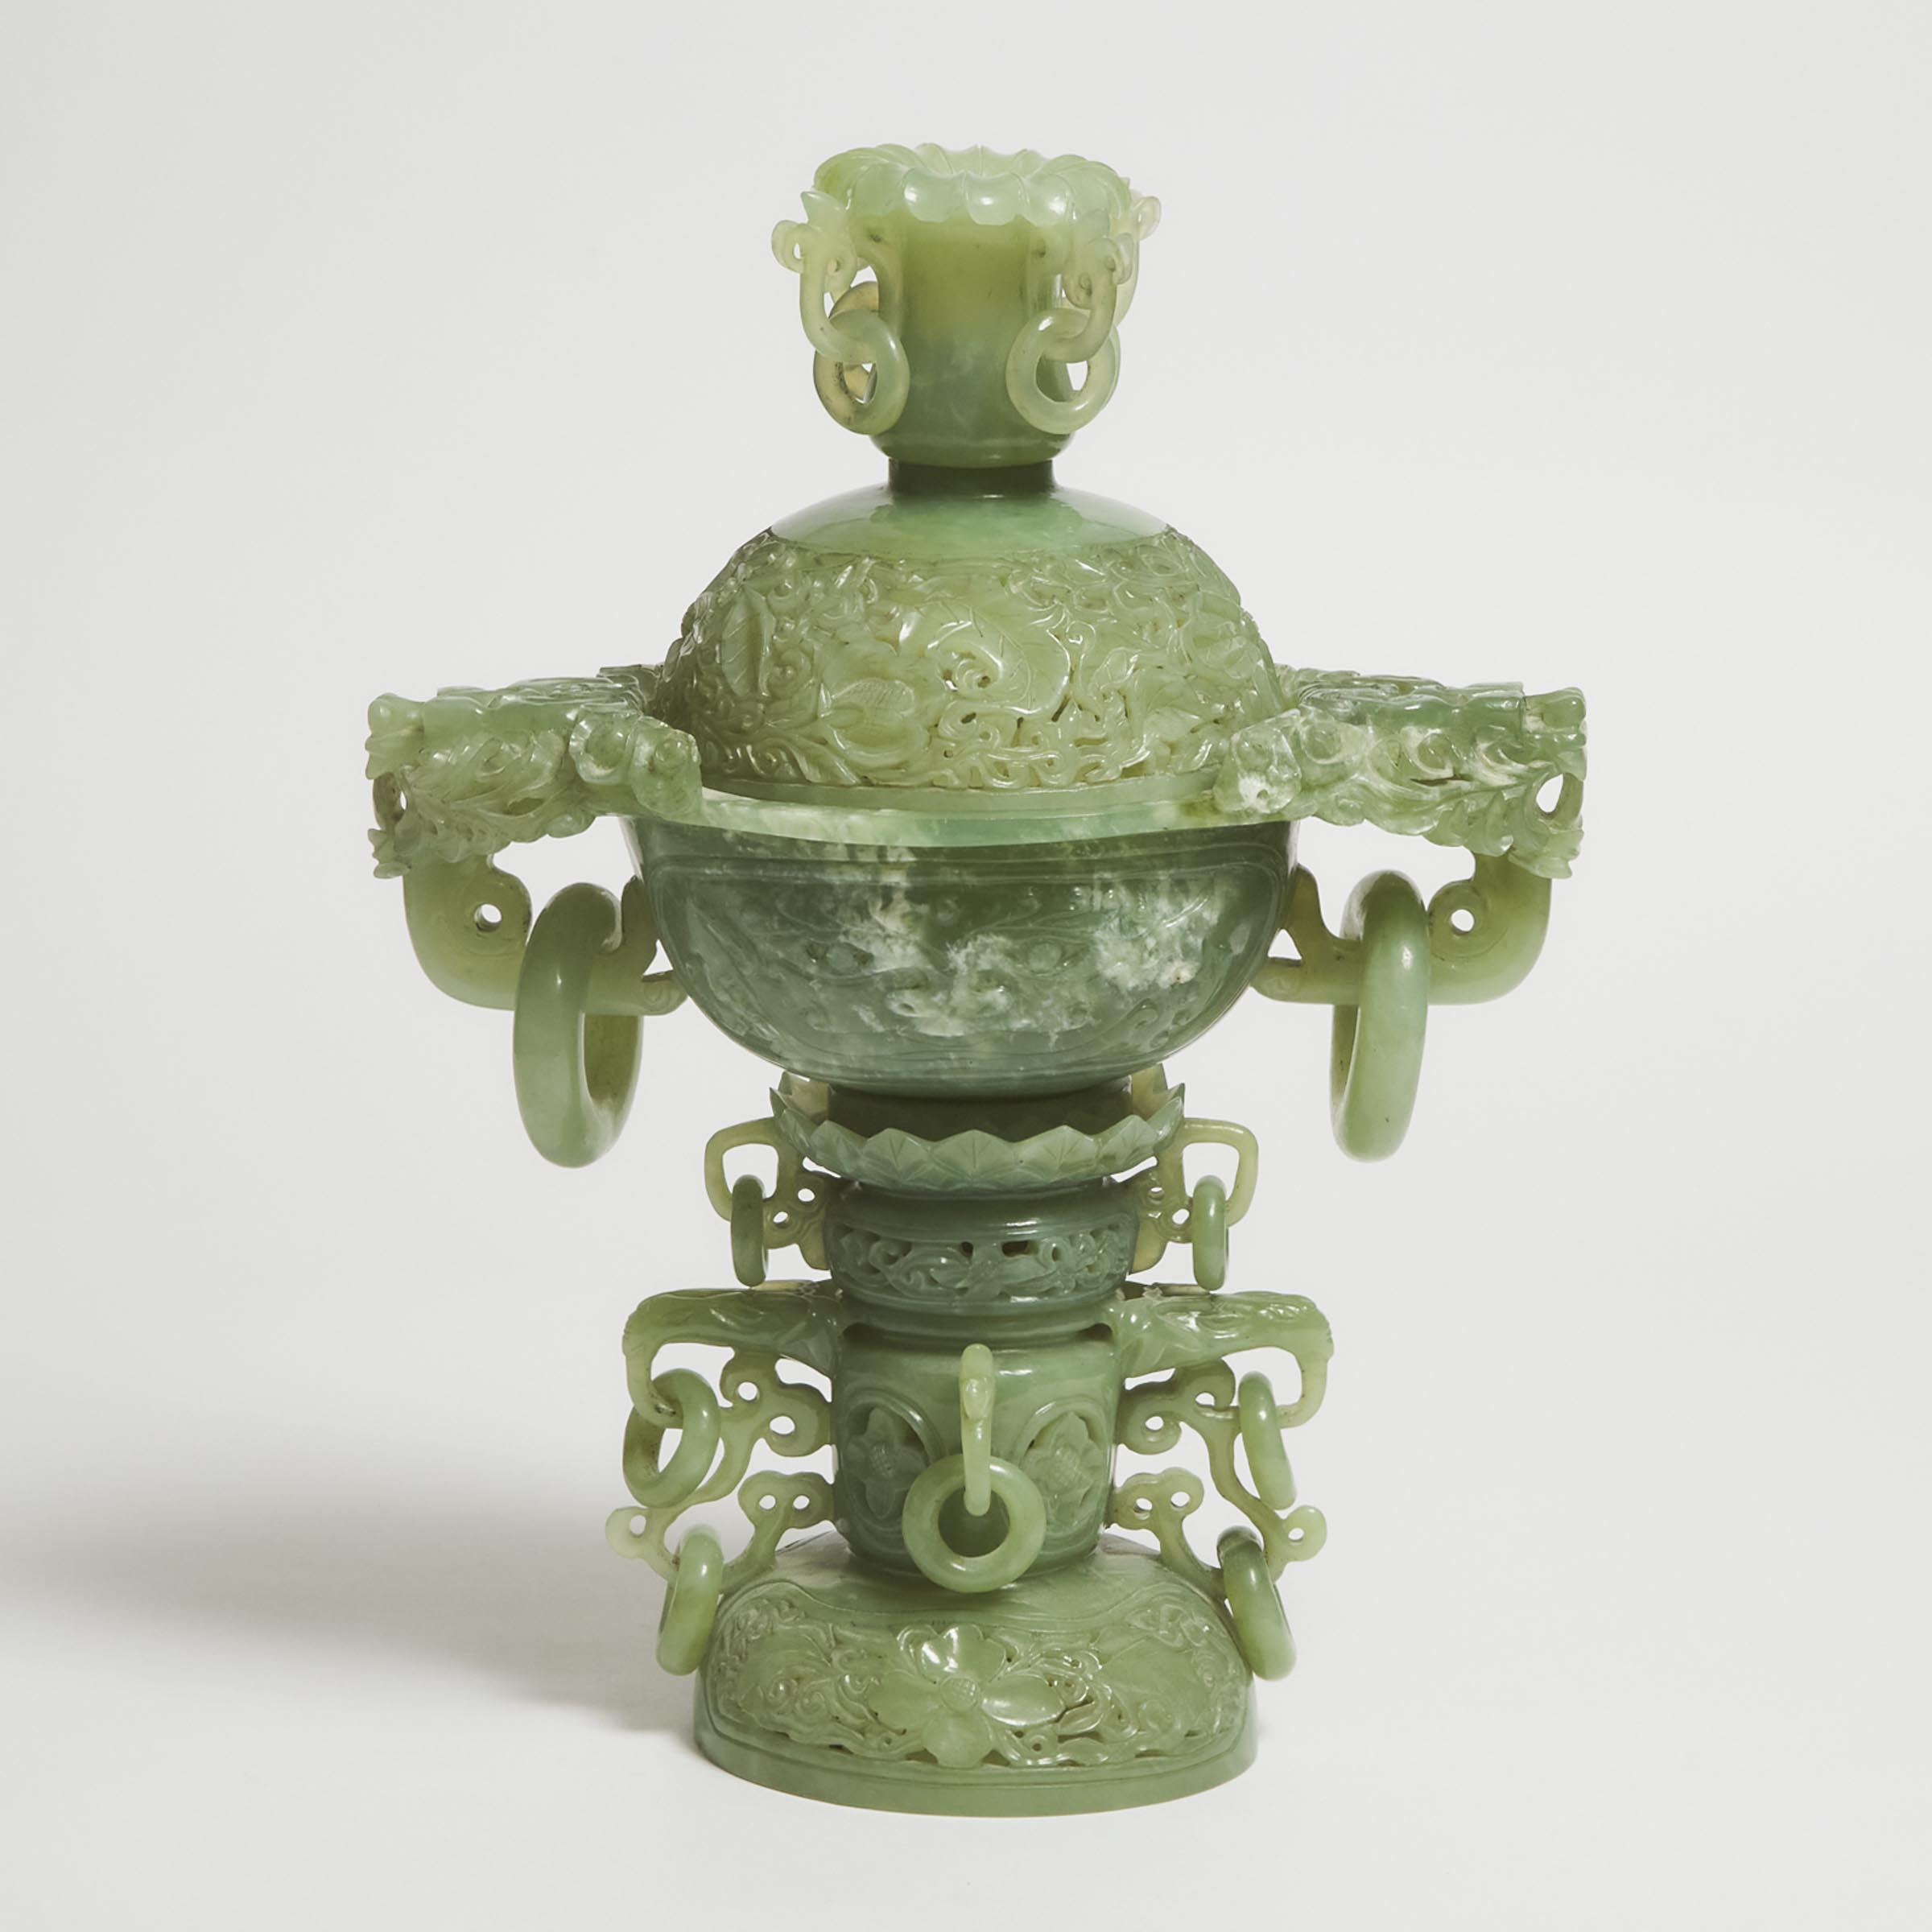 A Large Reticulated Carved Serpentine Censer/Perfumier, Mid 20th Century